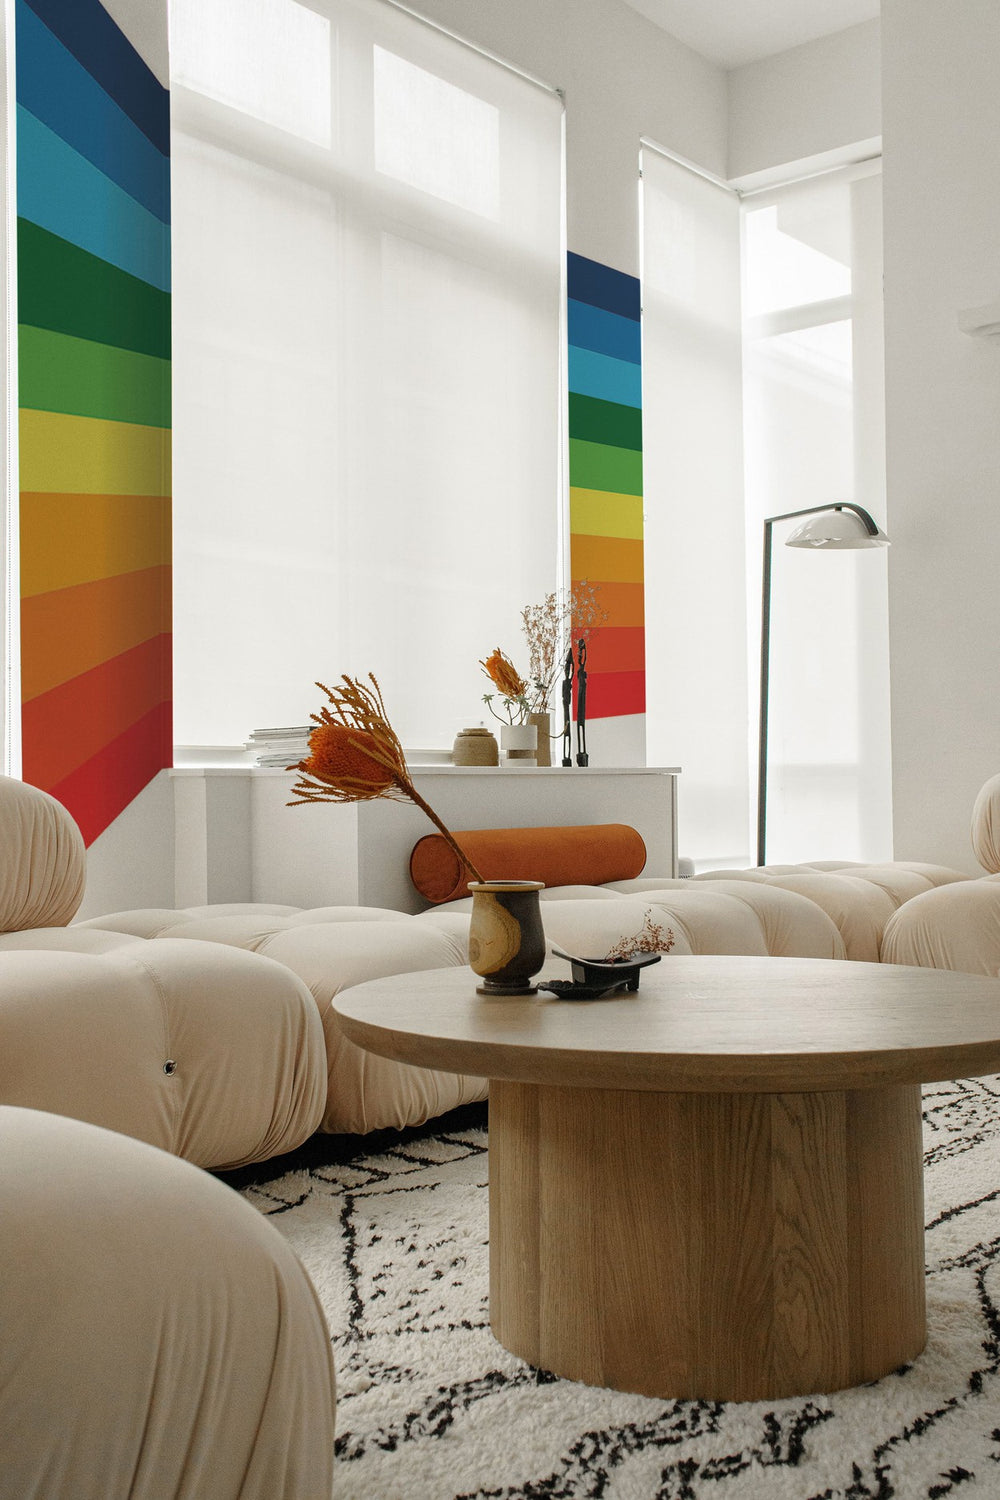 Modern living room with a bright rainbow striped mural on the wall, complemented by contemporary cream furniture and natural light.